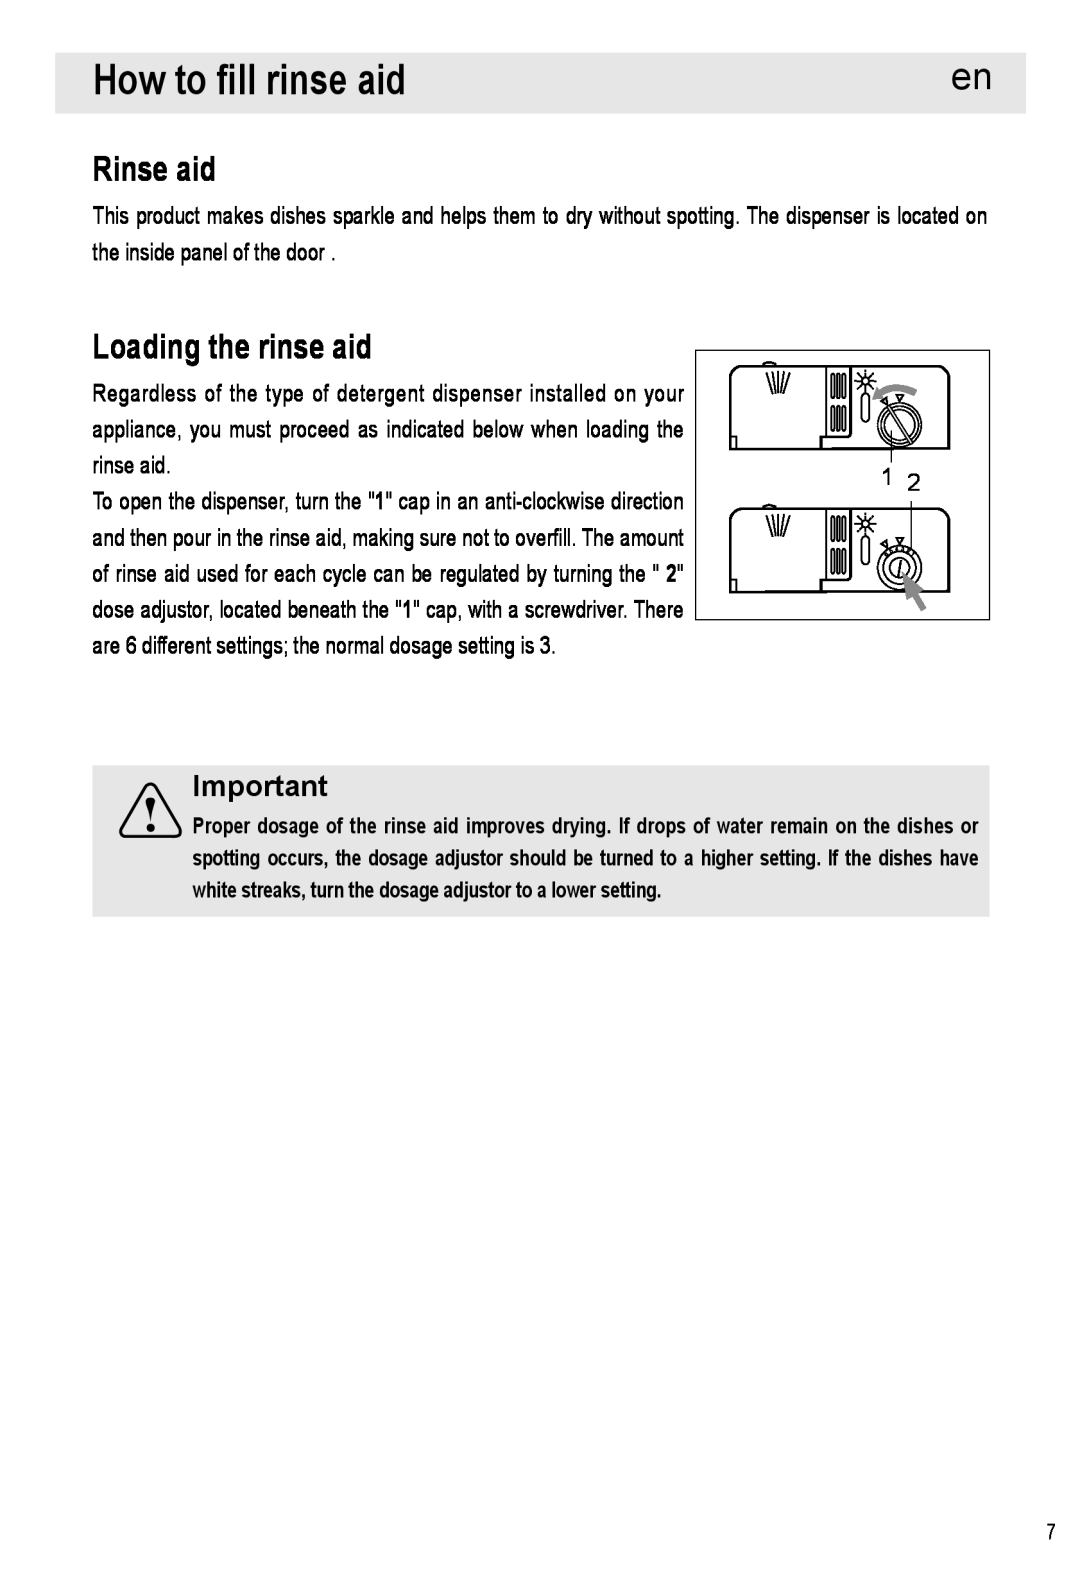 Haier HDW12-SFE1 operation manual How to fill rinse aid, Rinse aid, Loading the rinse aid 